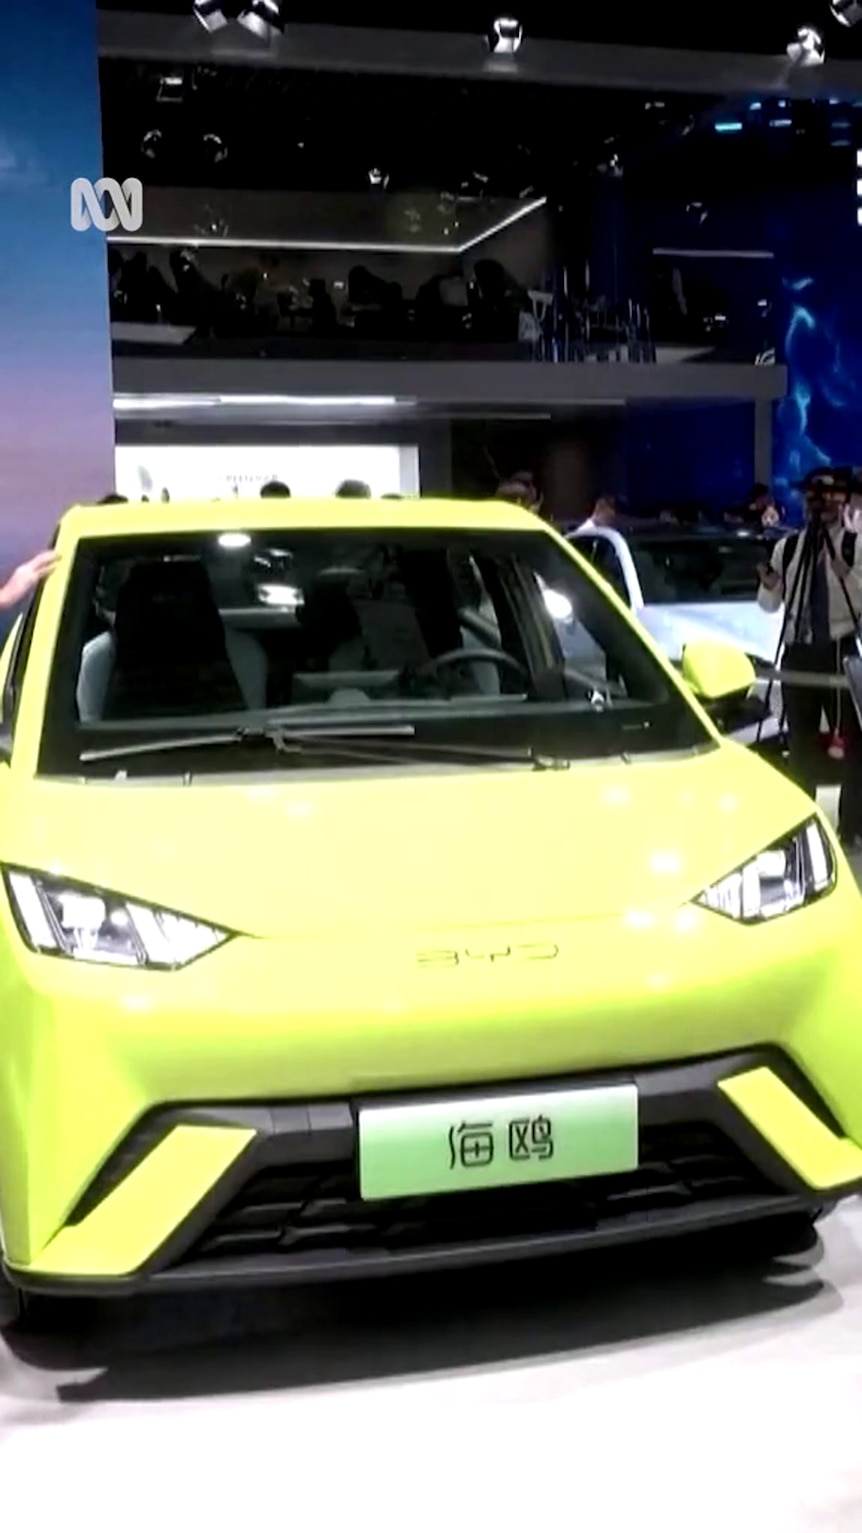 A yellow car with Chinese characters on the display plates sits under artificial lights indoors